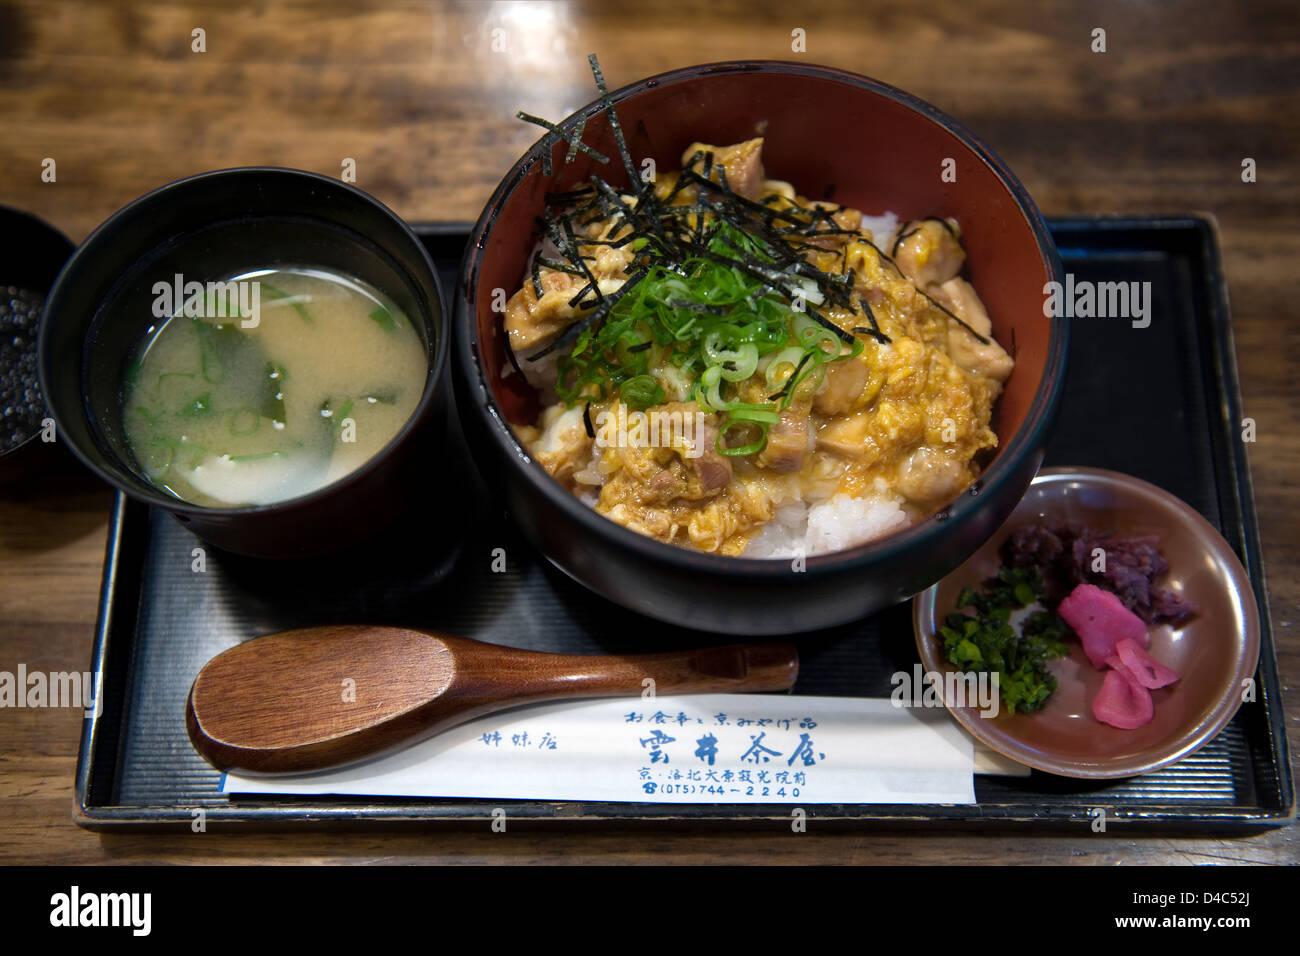 Teishoku lunch set 'oyakodon' ('parent and child' or chicken and egg bowl) with miso soup and otsukemono pickled garnishes. Stock Photo